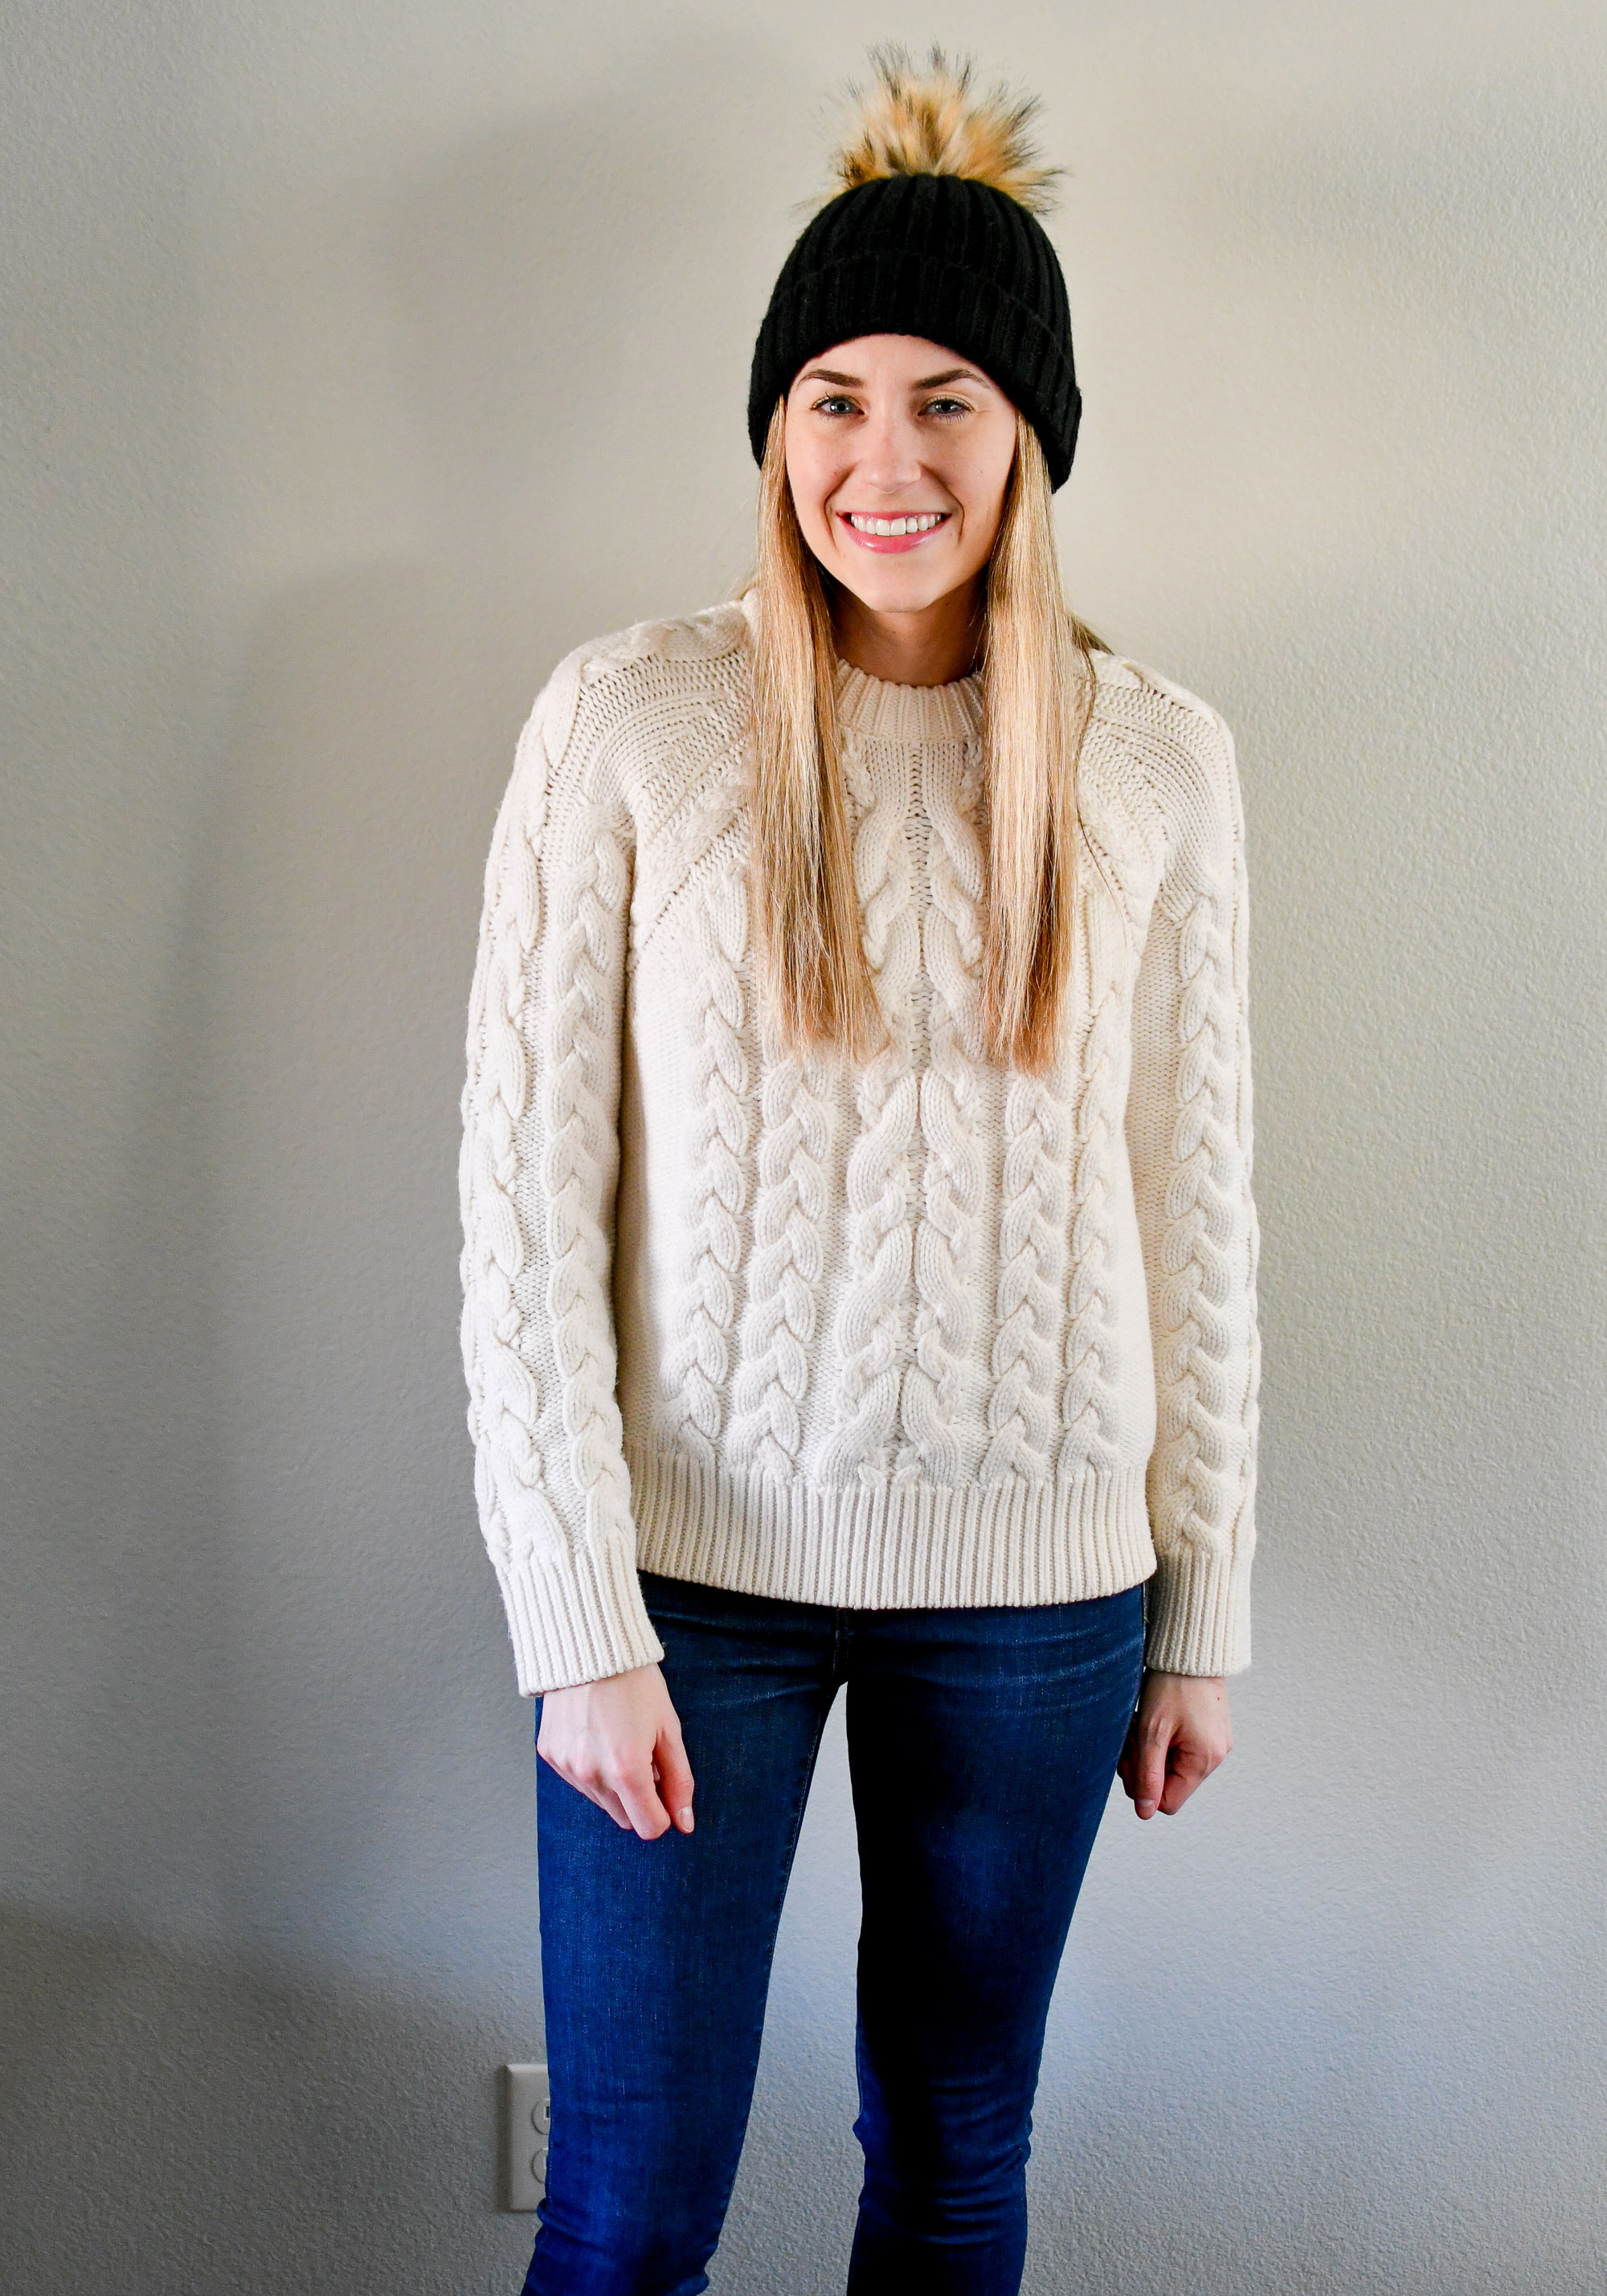 Ivory cable knit sweater outfit with black beanie — Cotton Cashmere Cat Hair